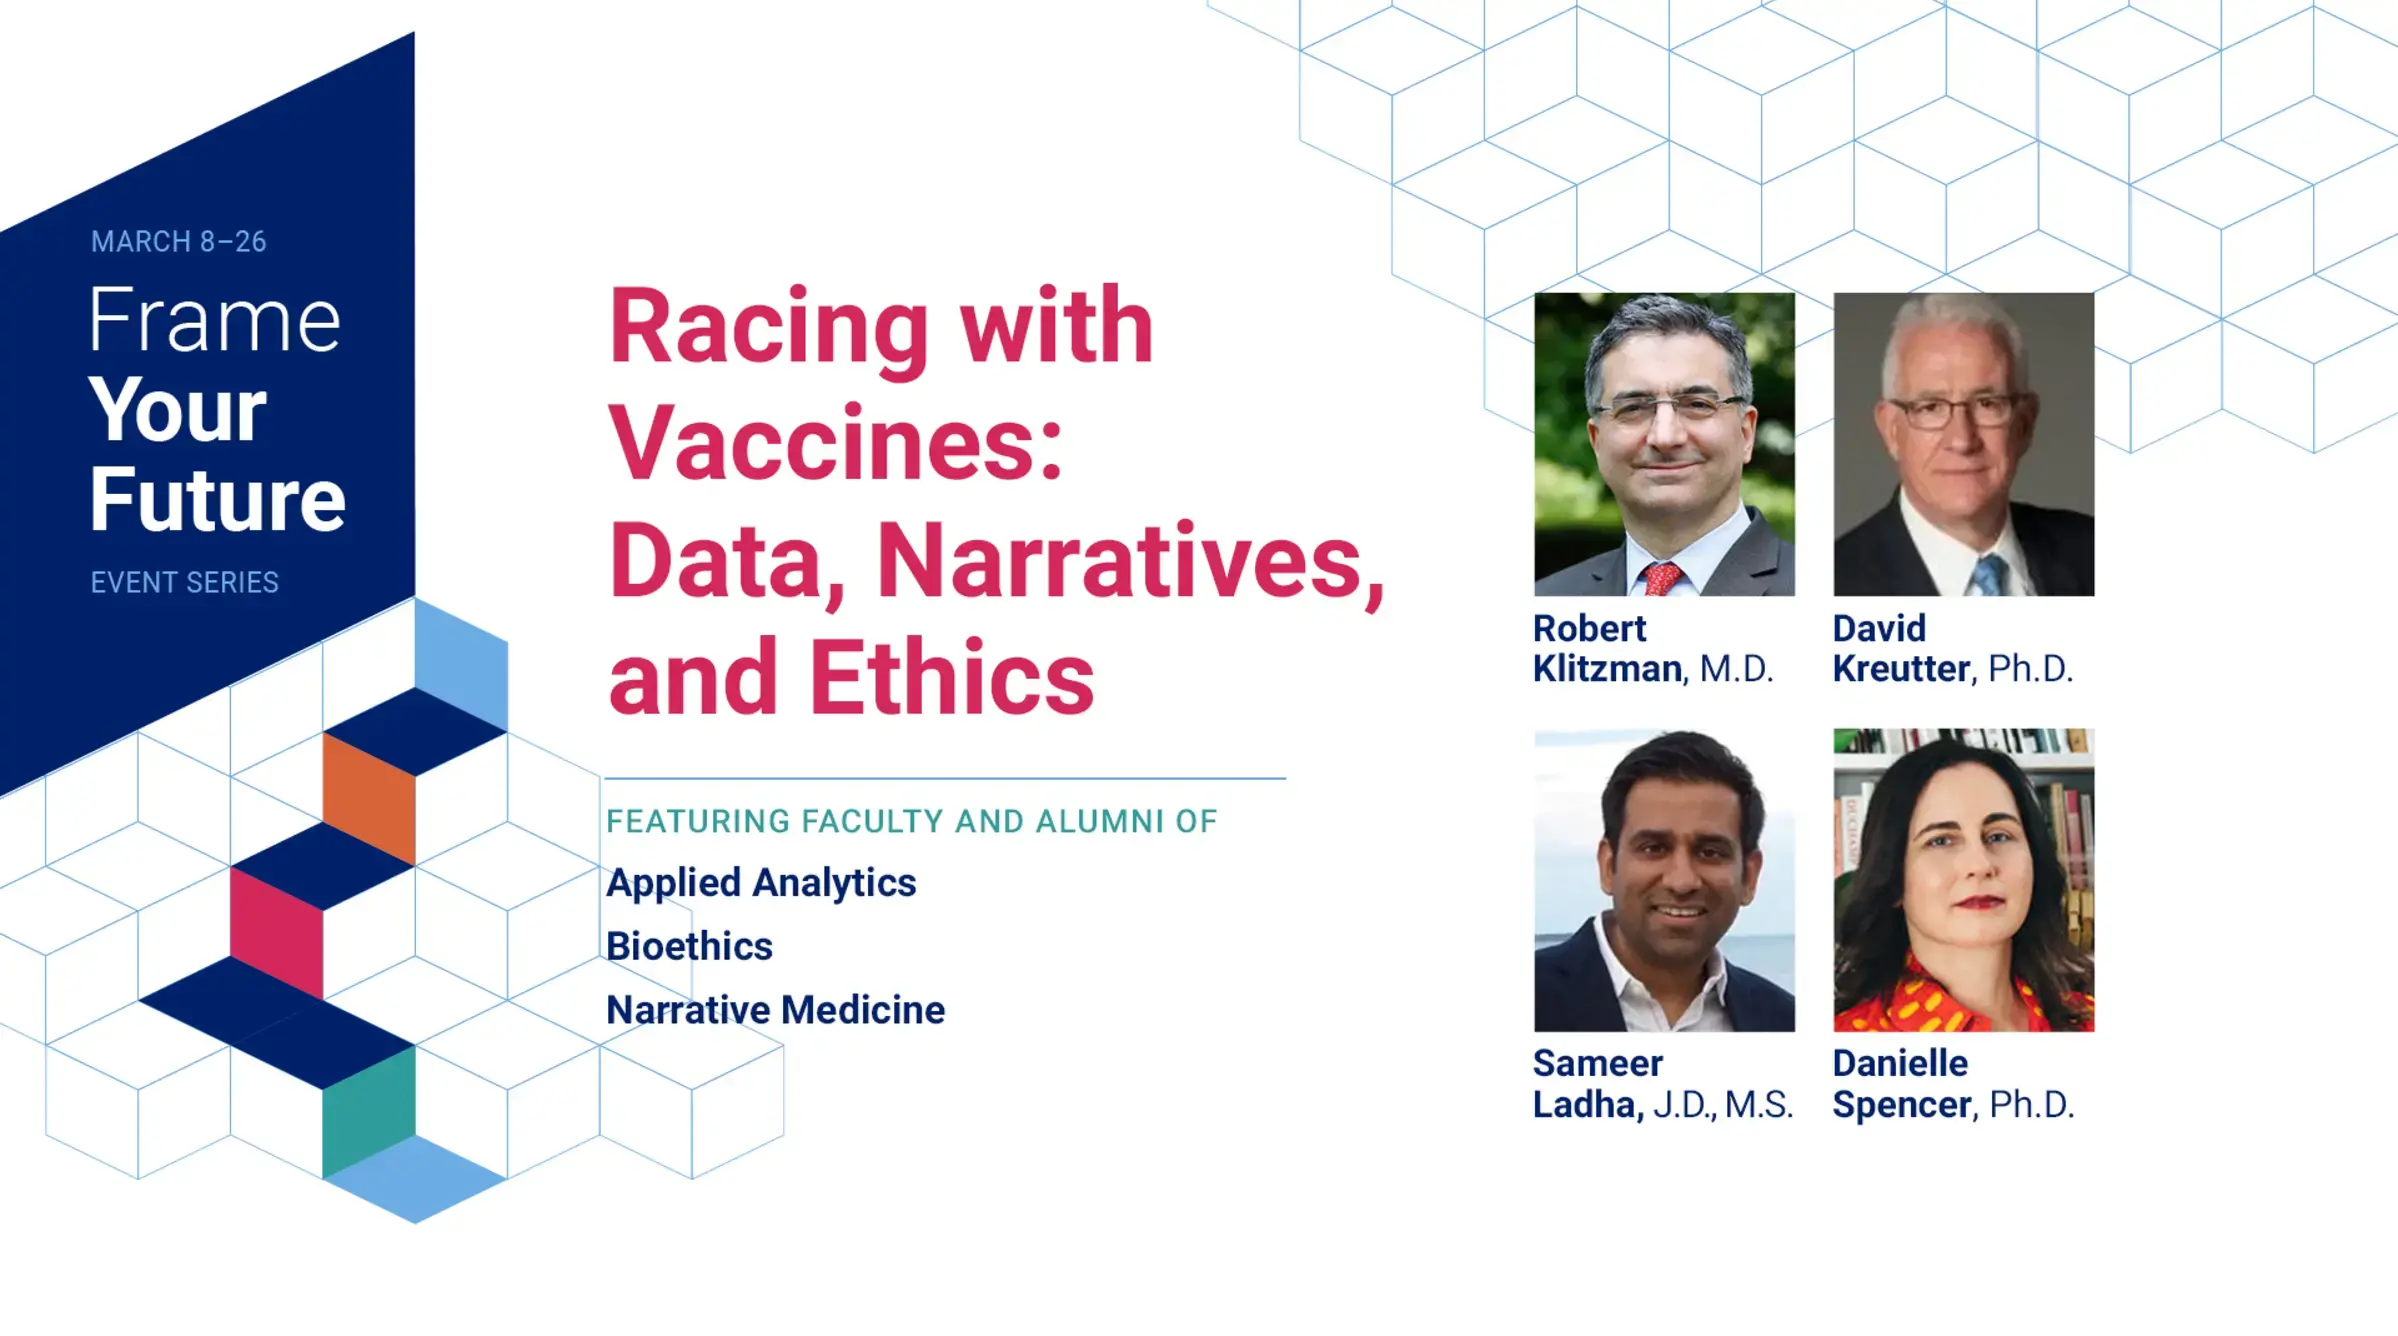 Racing with Vaccines: Data, Narratives, and Ethics will be held online at 6:15 pm ET on March 24, 2021. 